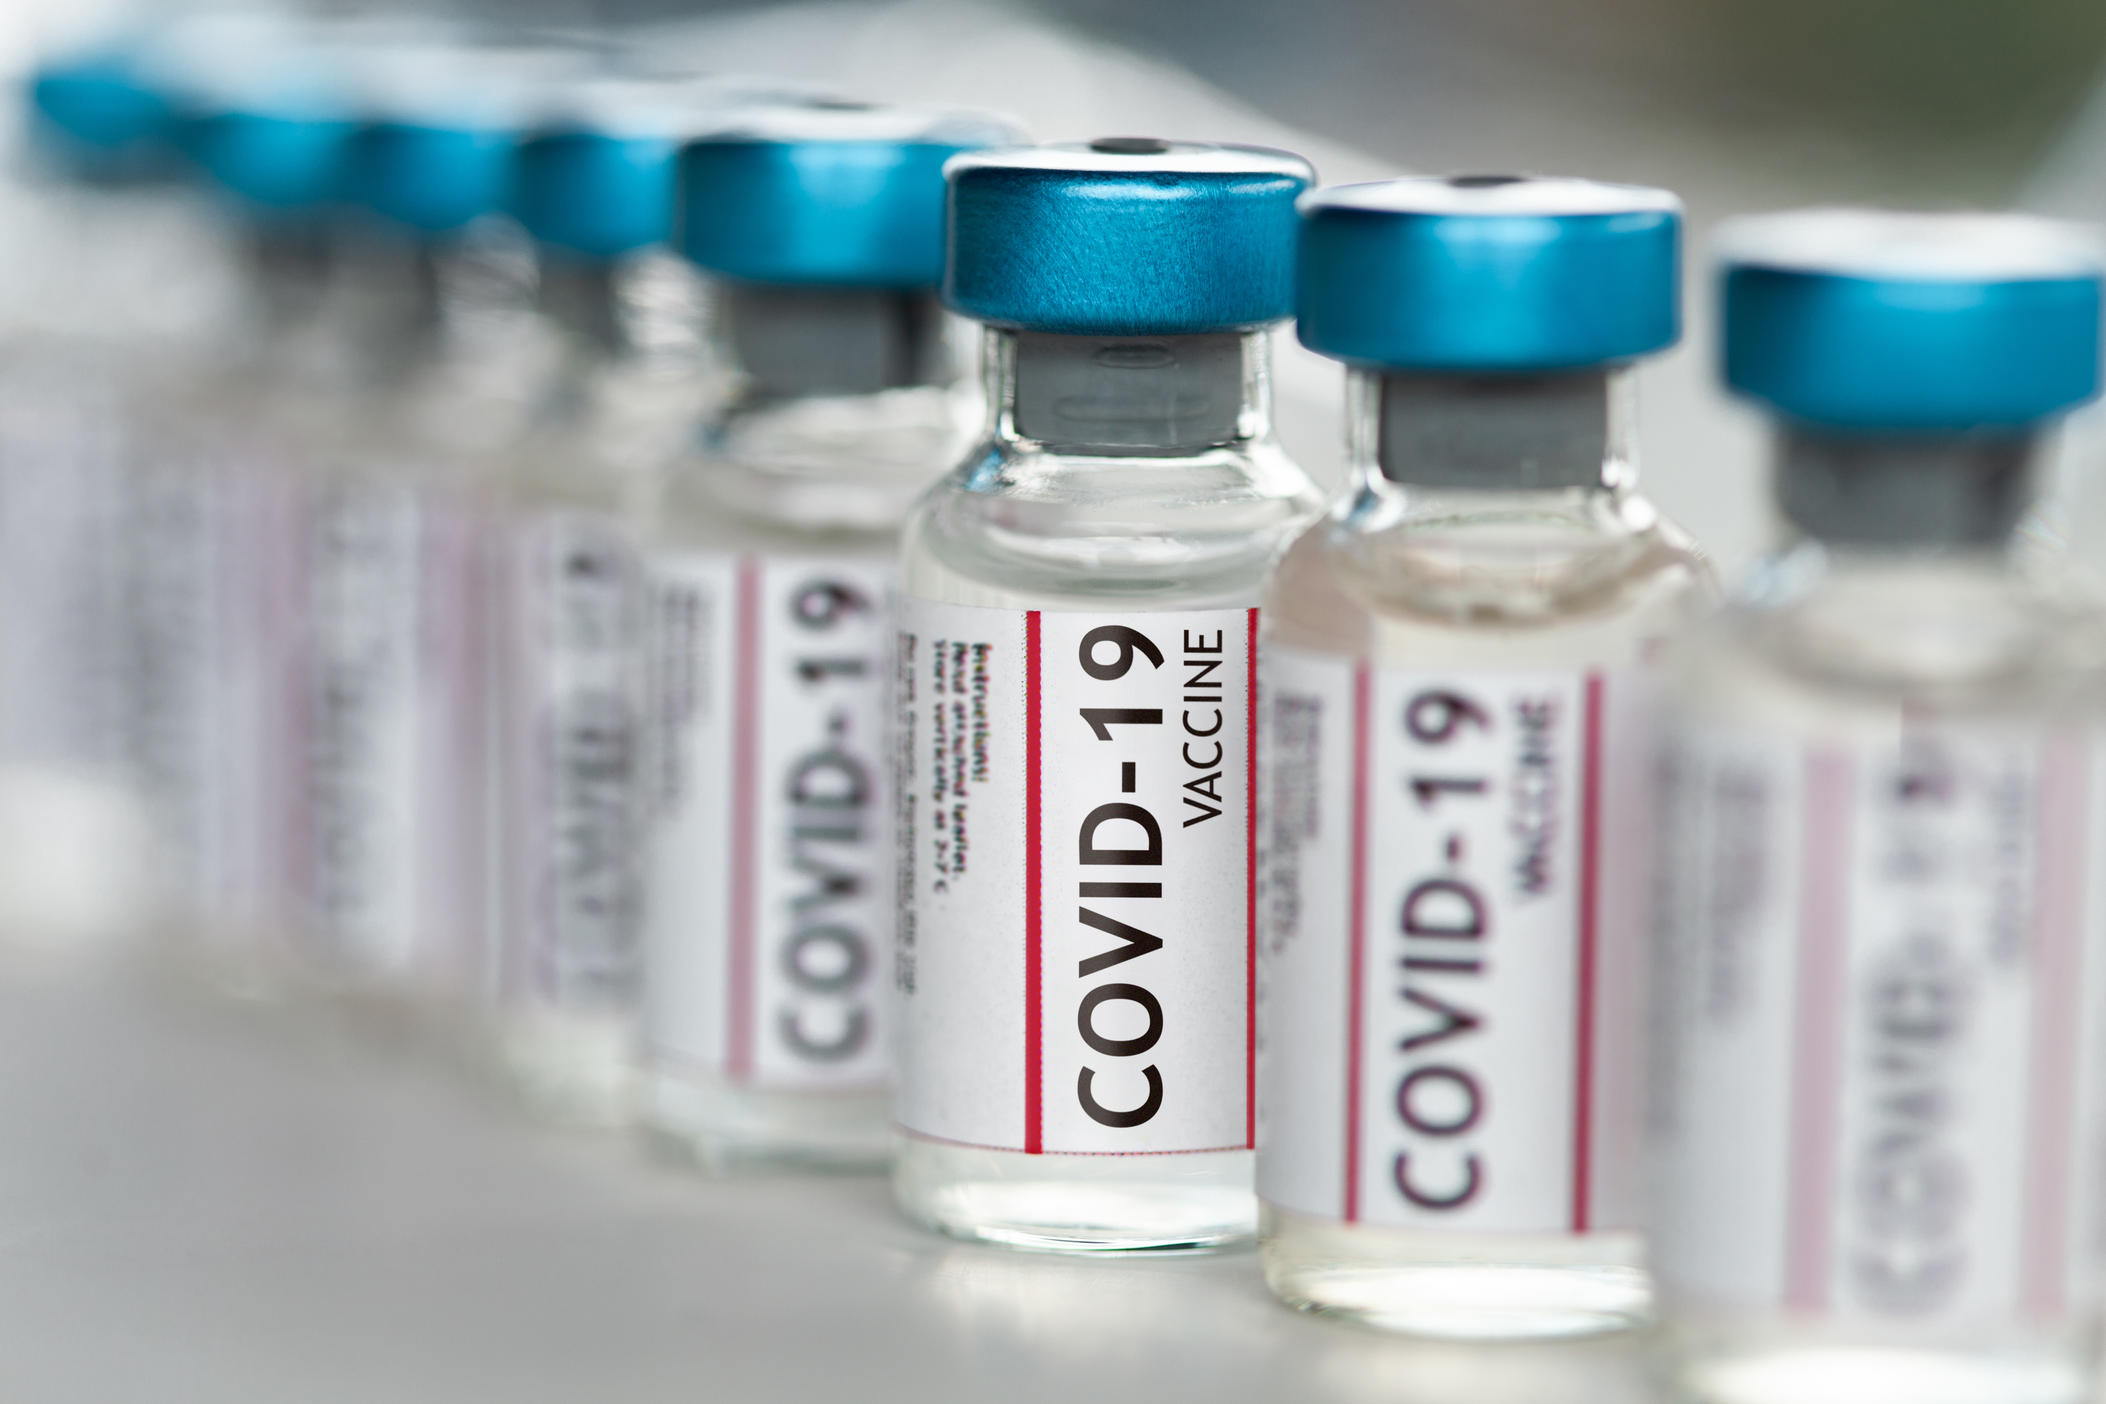 Vaccine Distribution for Persons with Disabilities during COVID-19 Crisis